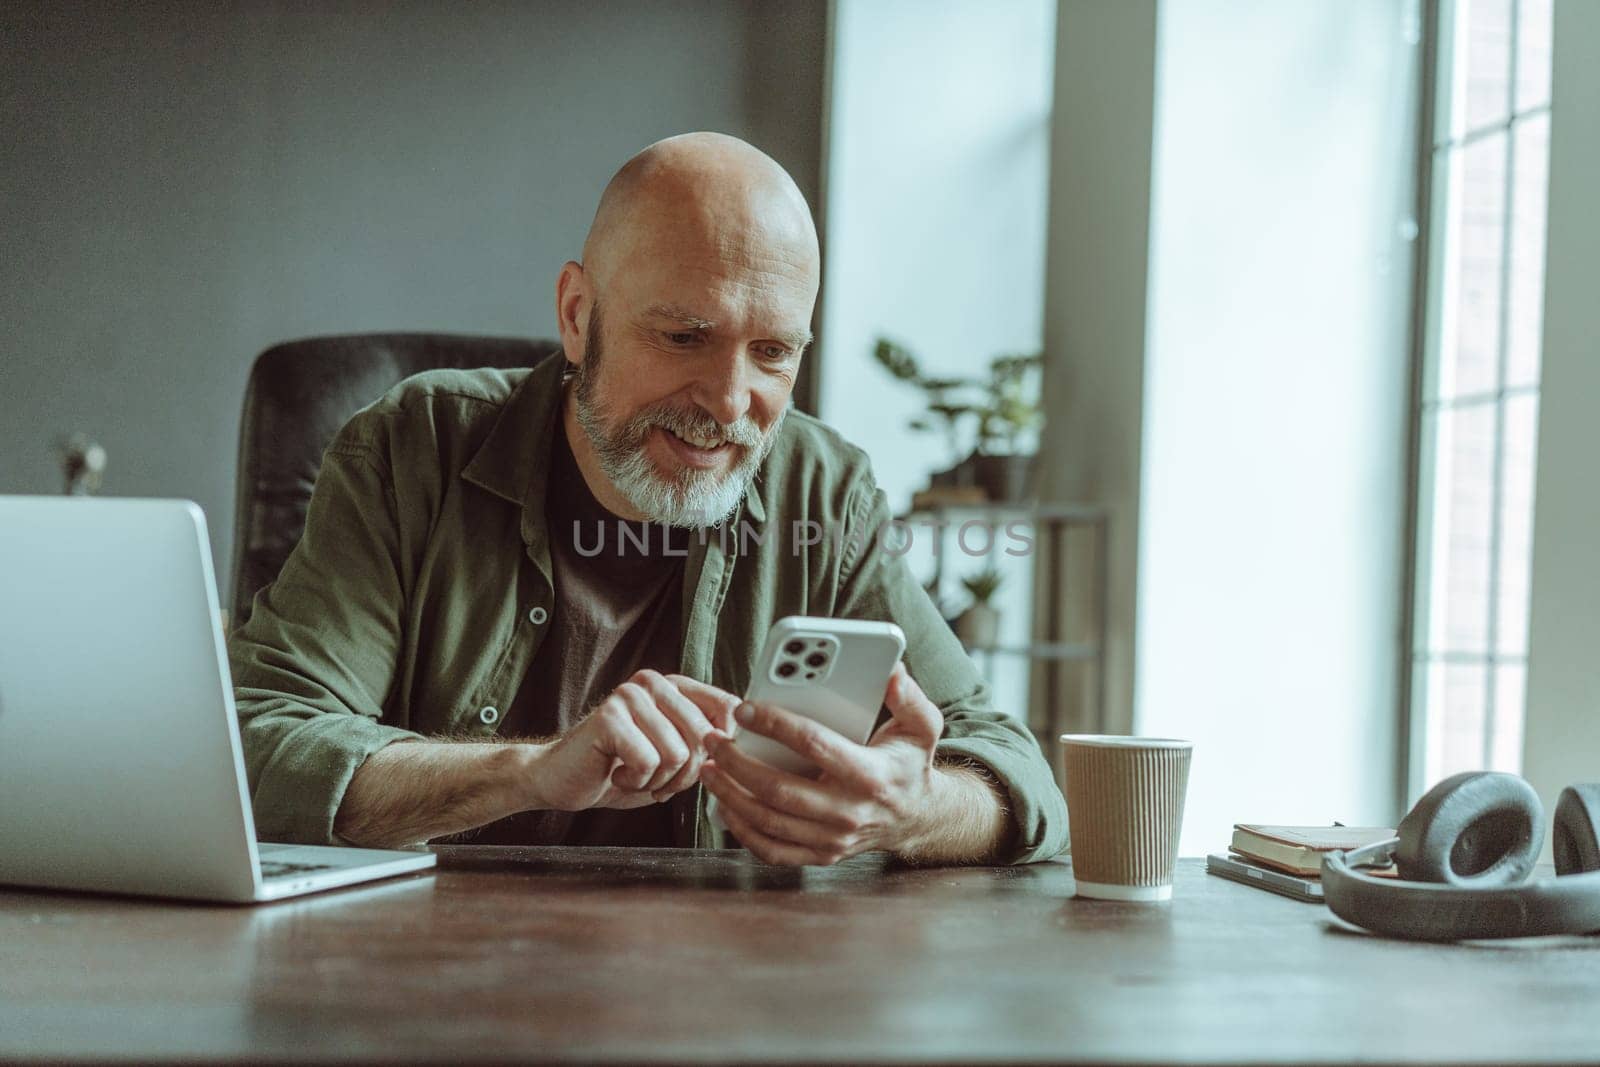 Mature old man comfortably seated home, actively engaged in texting message on phone. Desk adorned with laptop, headphones, and cup of coffee, indicating setup conducive to work and relaxation. by LipikStockMedia